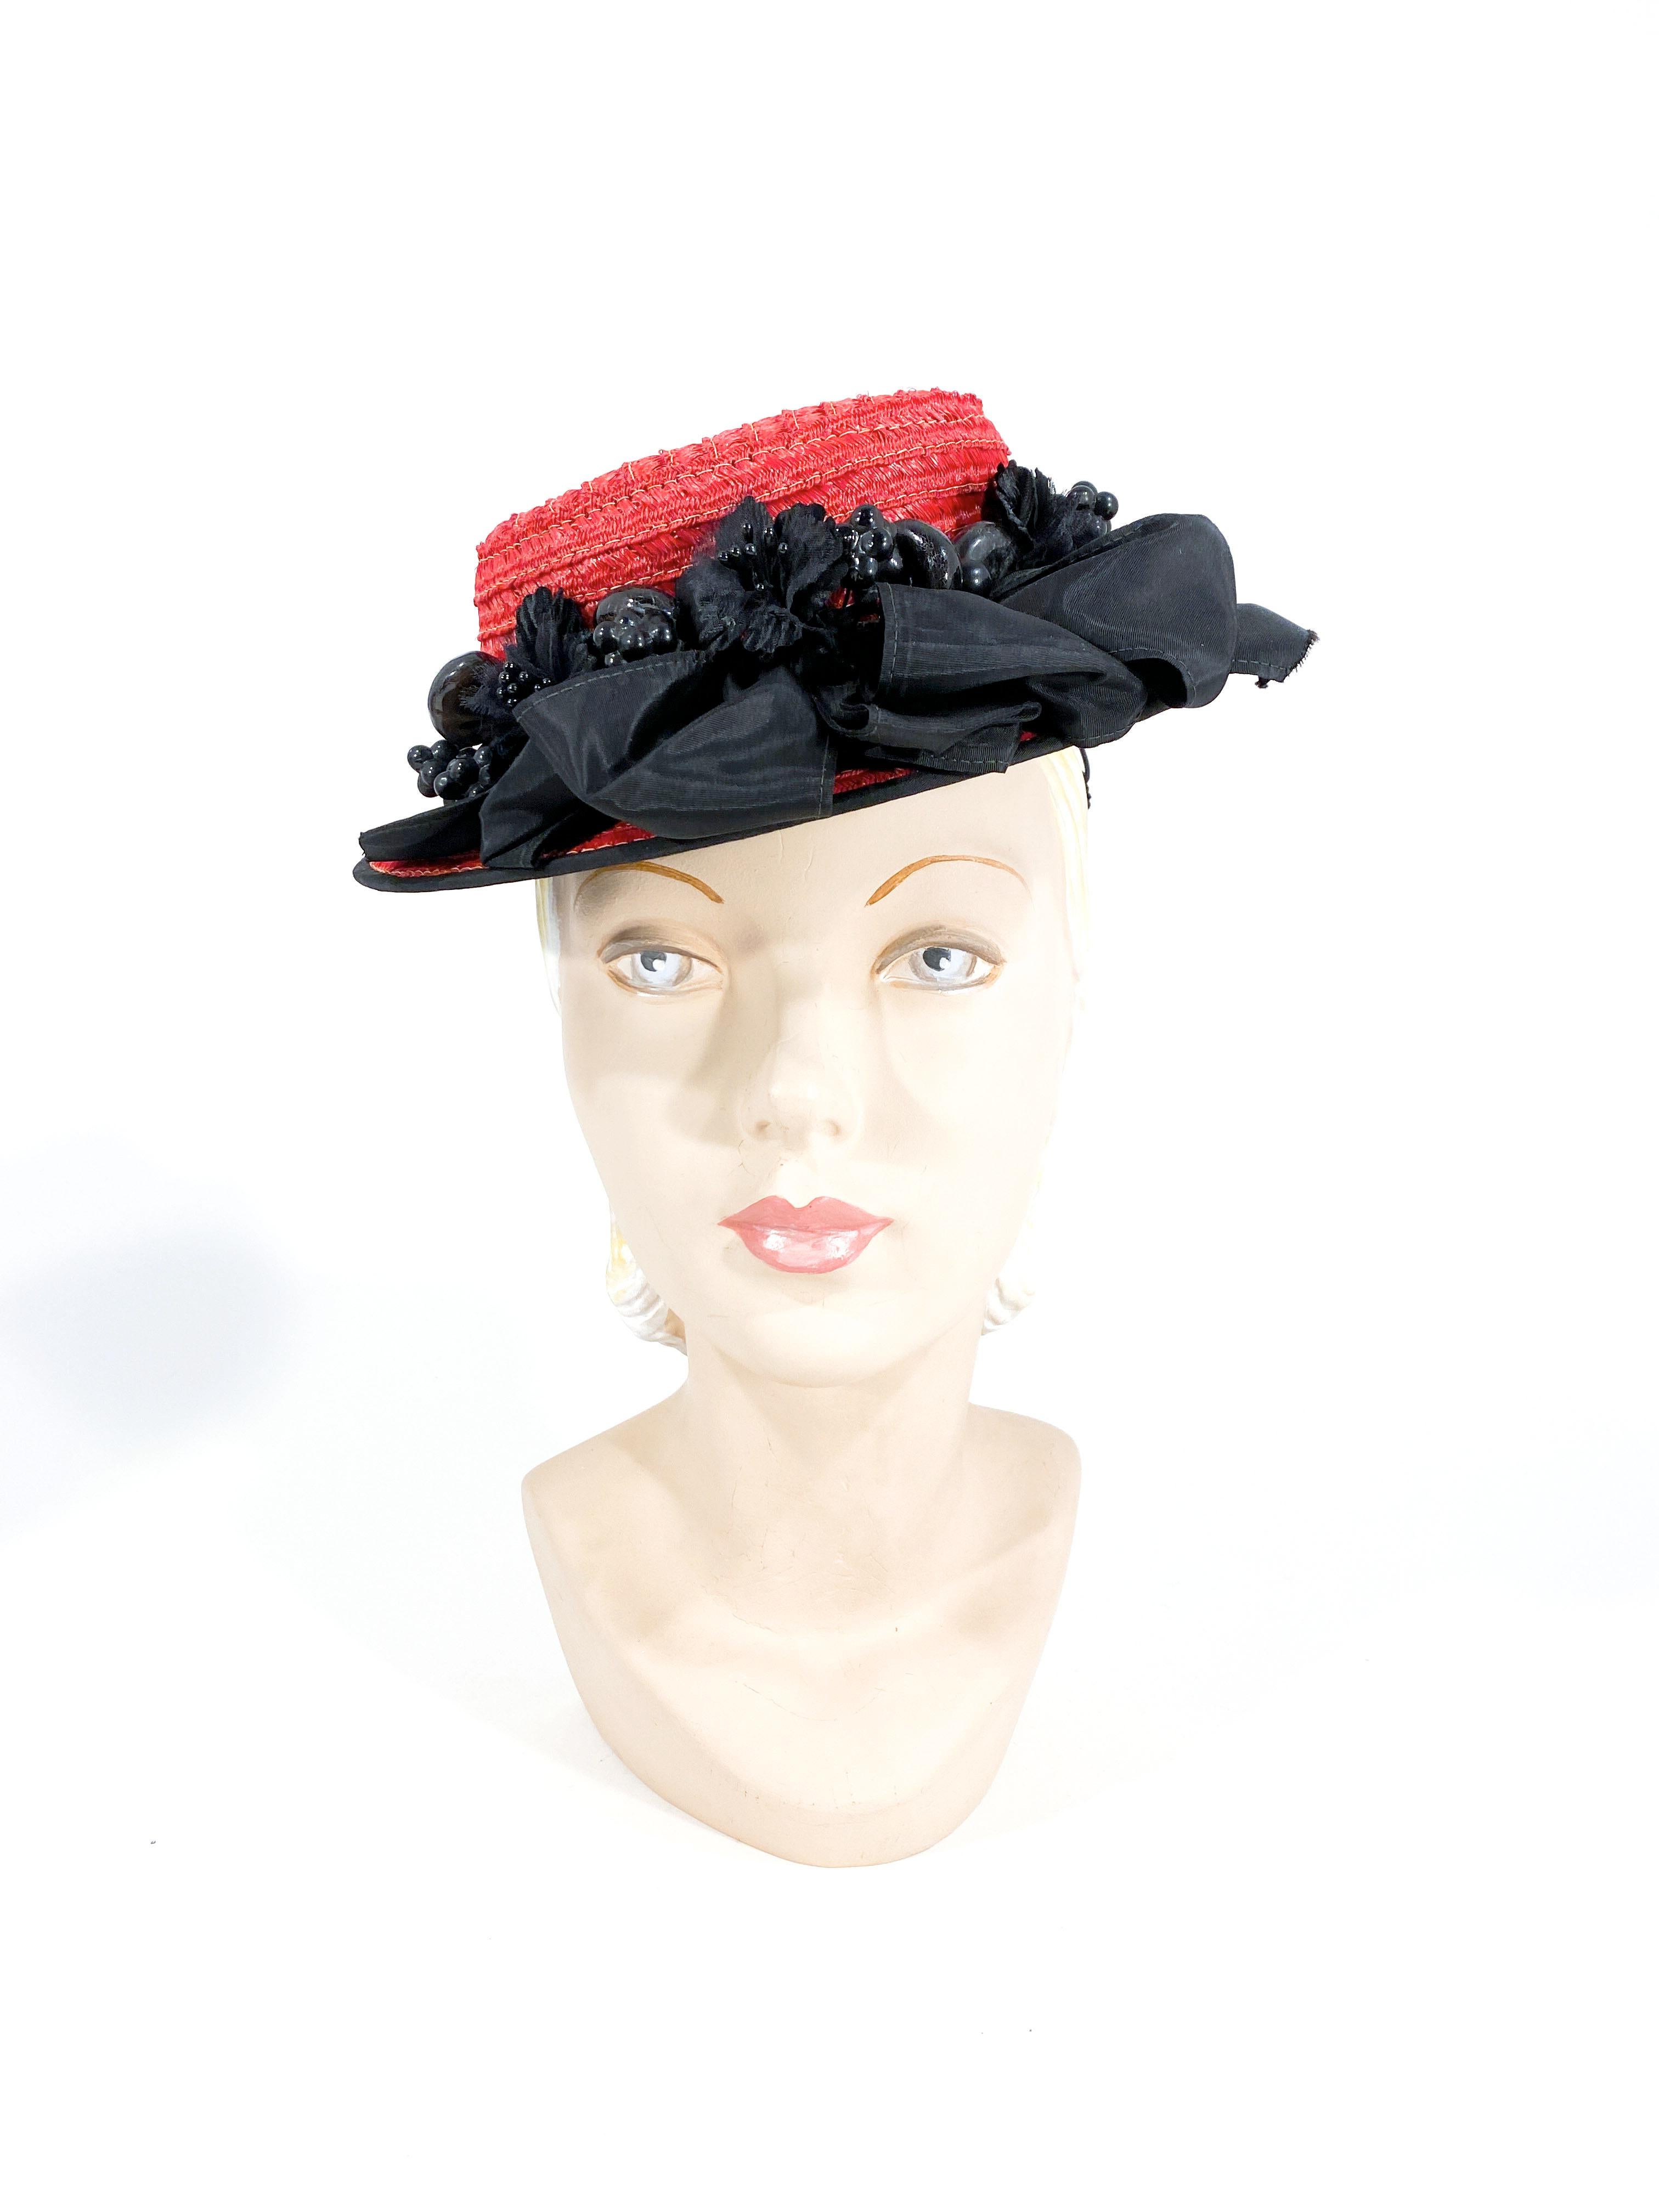 1940s red coated and woven straw toy pork pie hat. The short brim is decorated with a black taffeta trim, large looped taffeta ruffles, black lacquered wooden fruit, a narrow band, and silk hand-cut flowers. The interior hat band has an attached